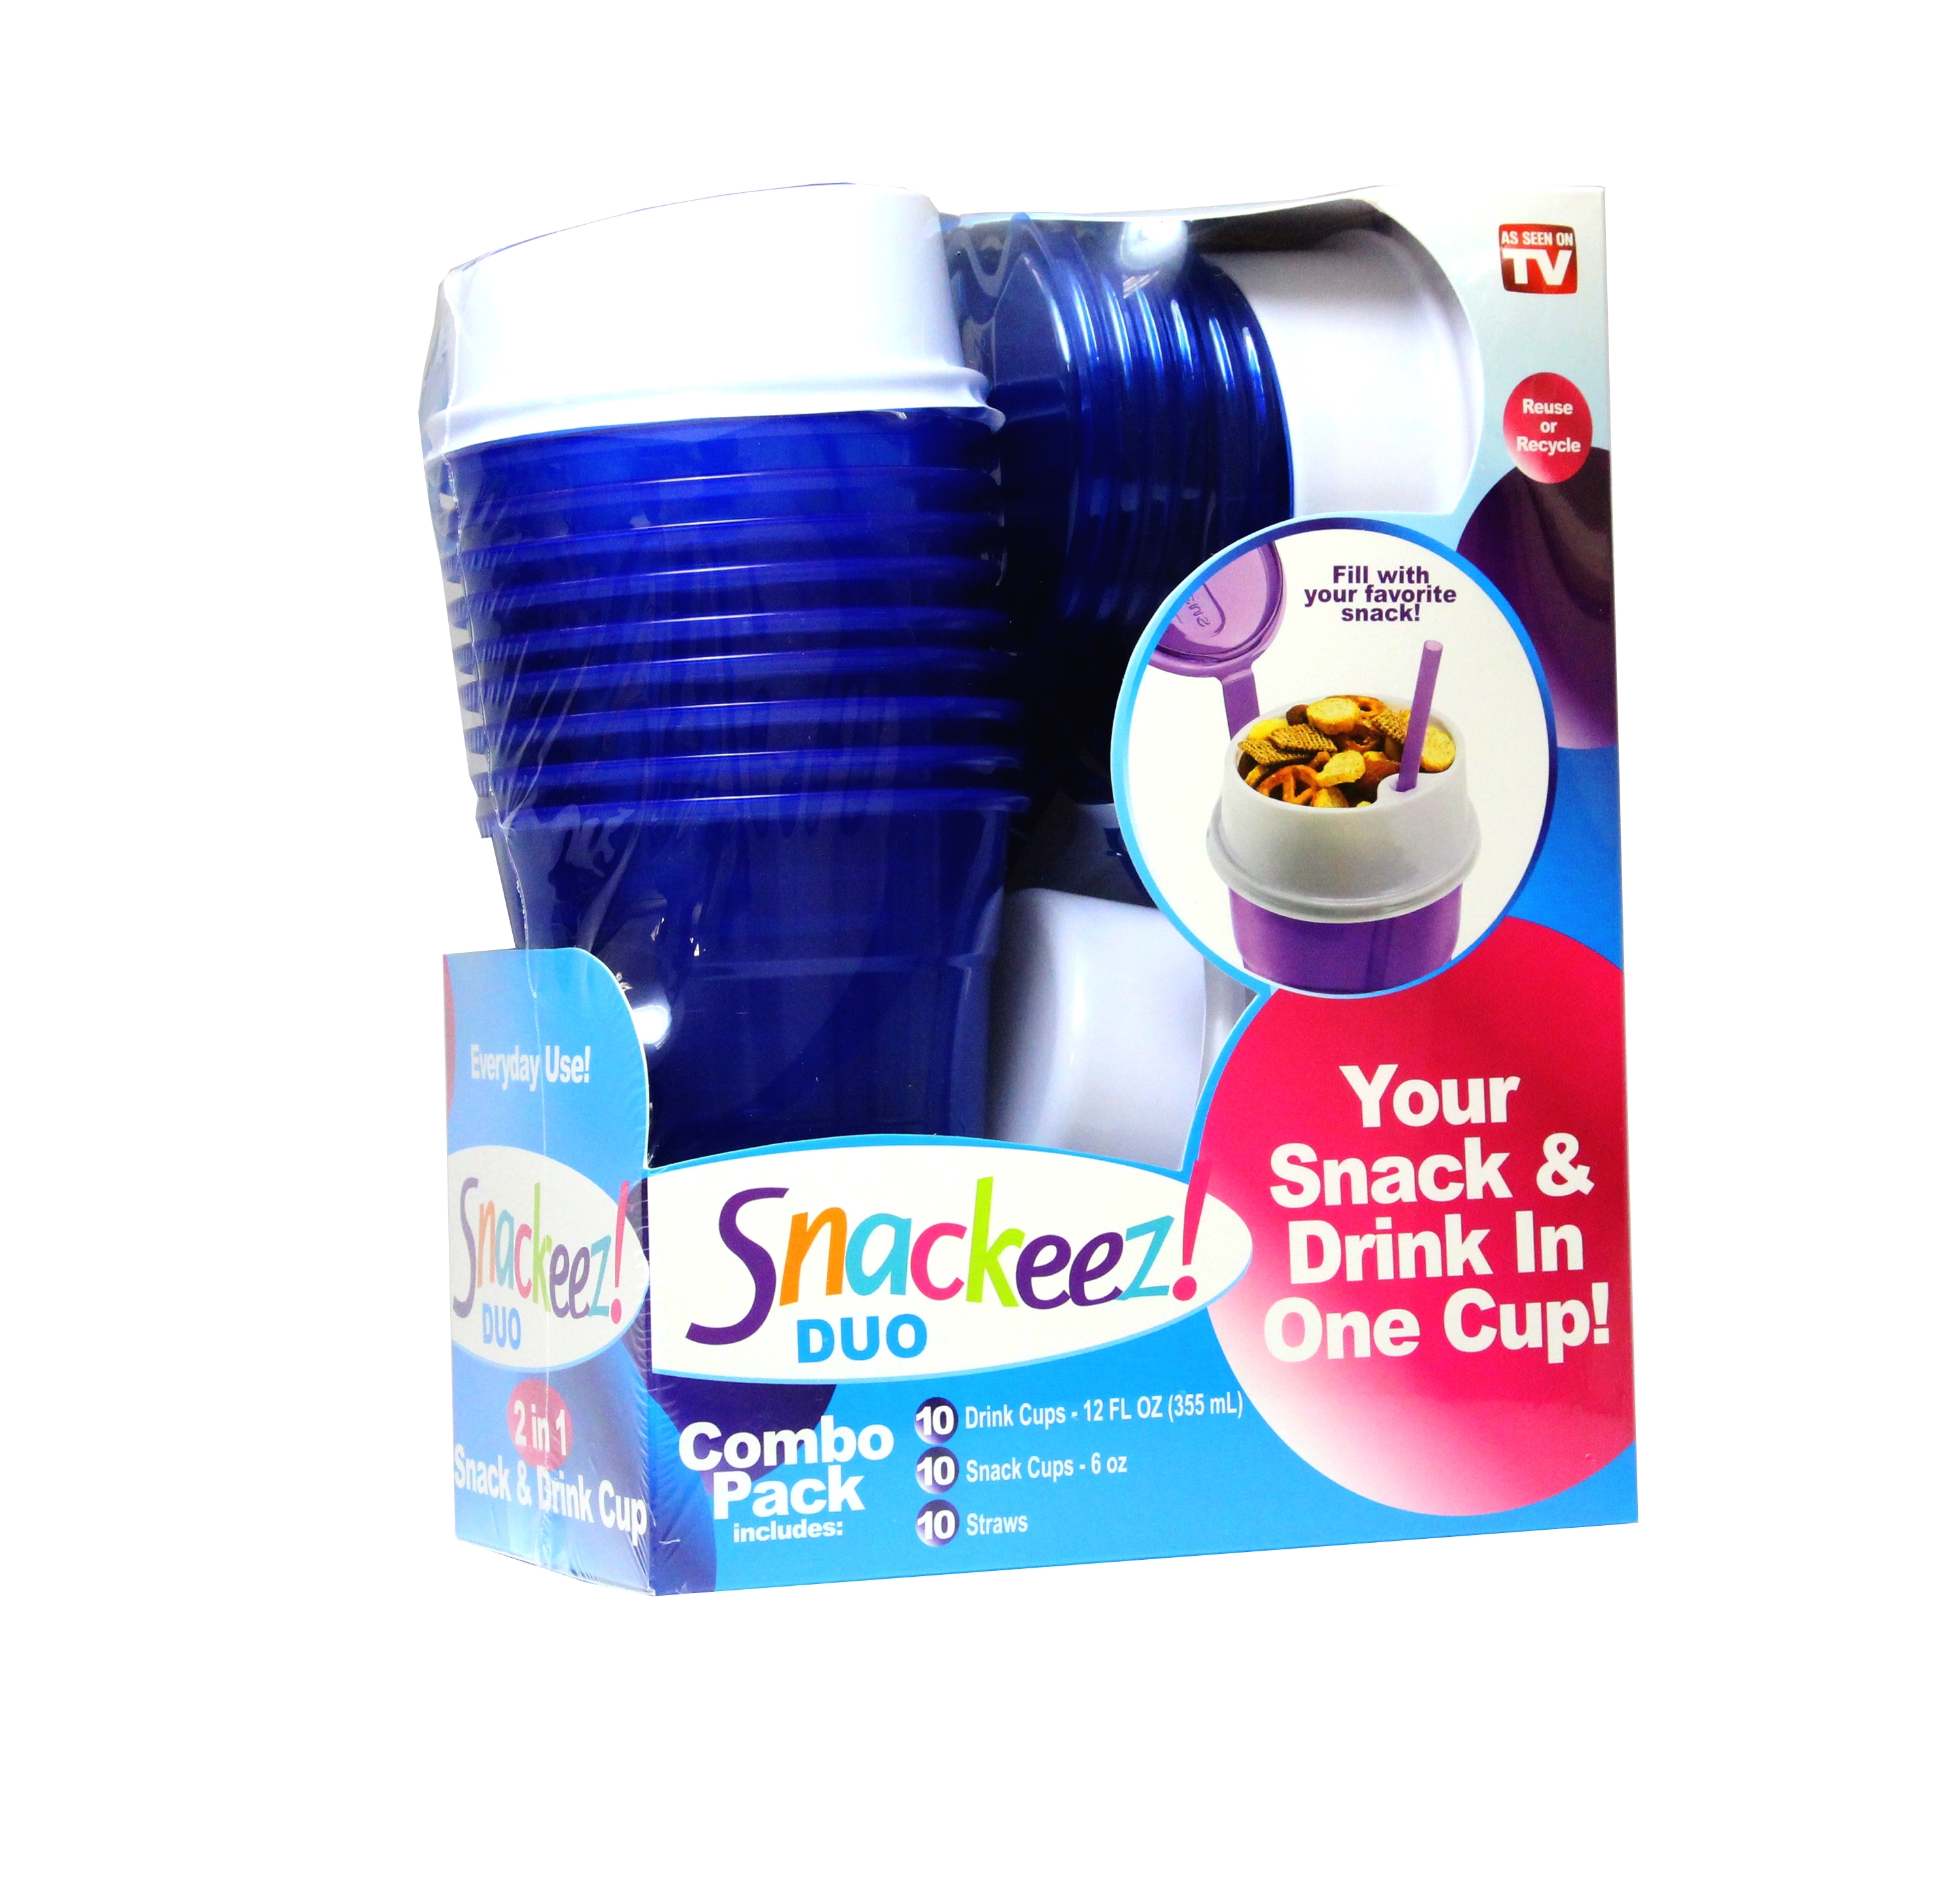 Snackeez Launches Next Generation 2-in-1 Snack & Drink Cup